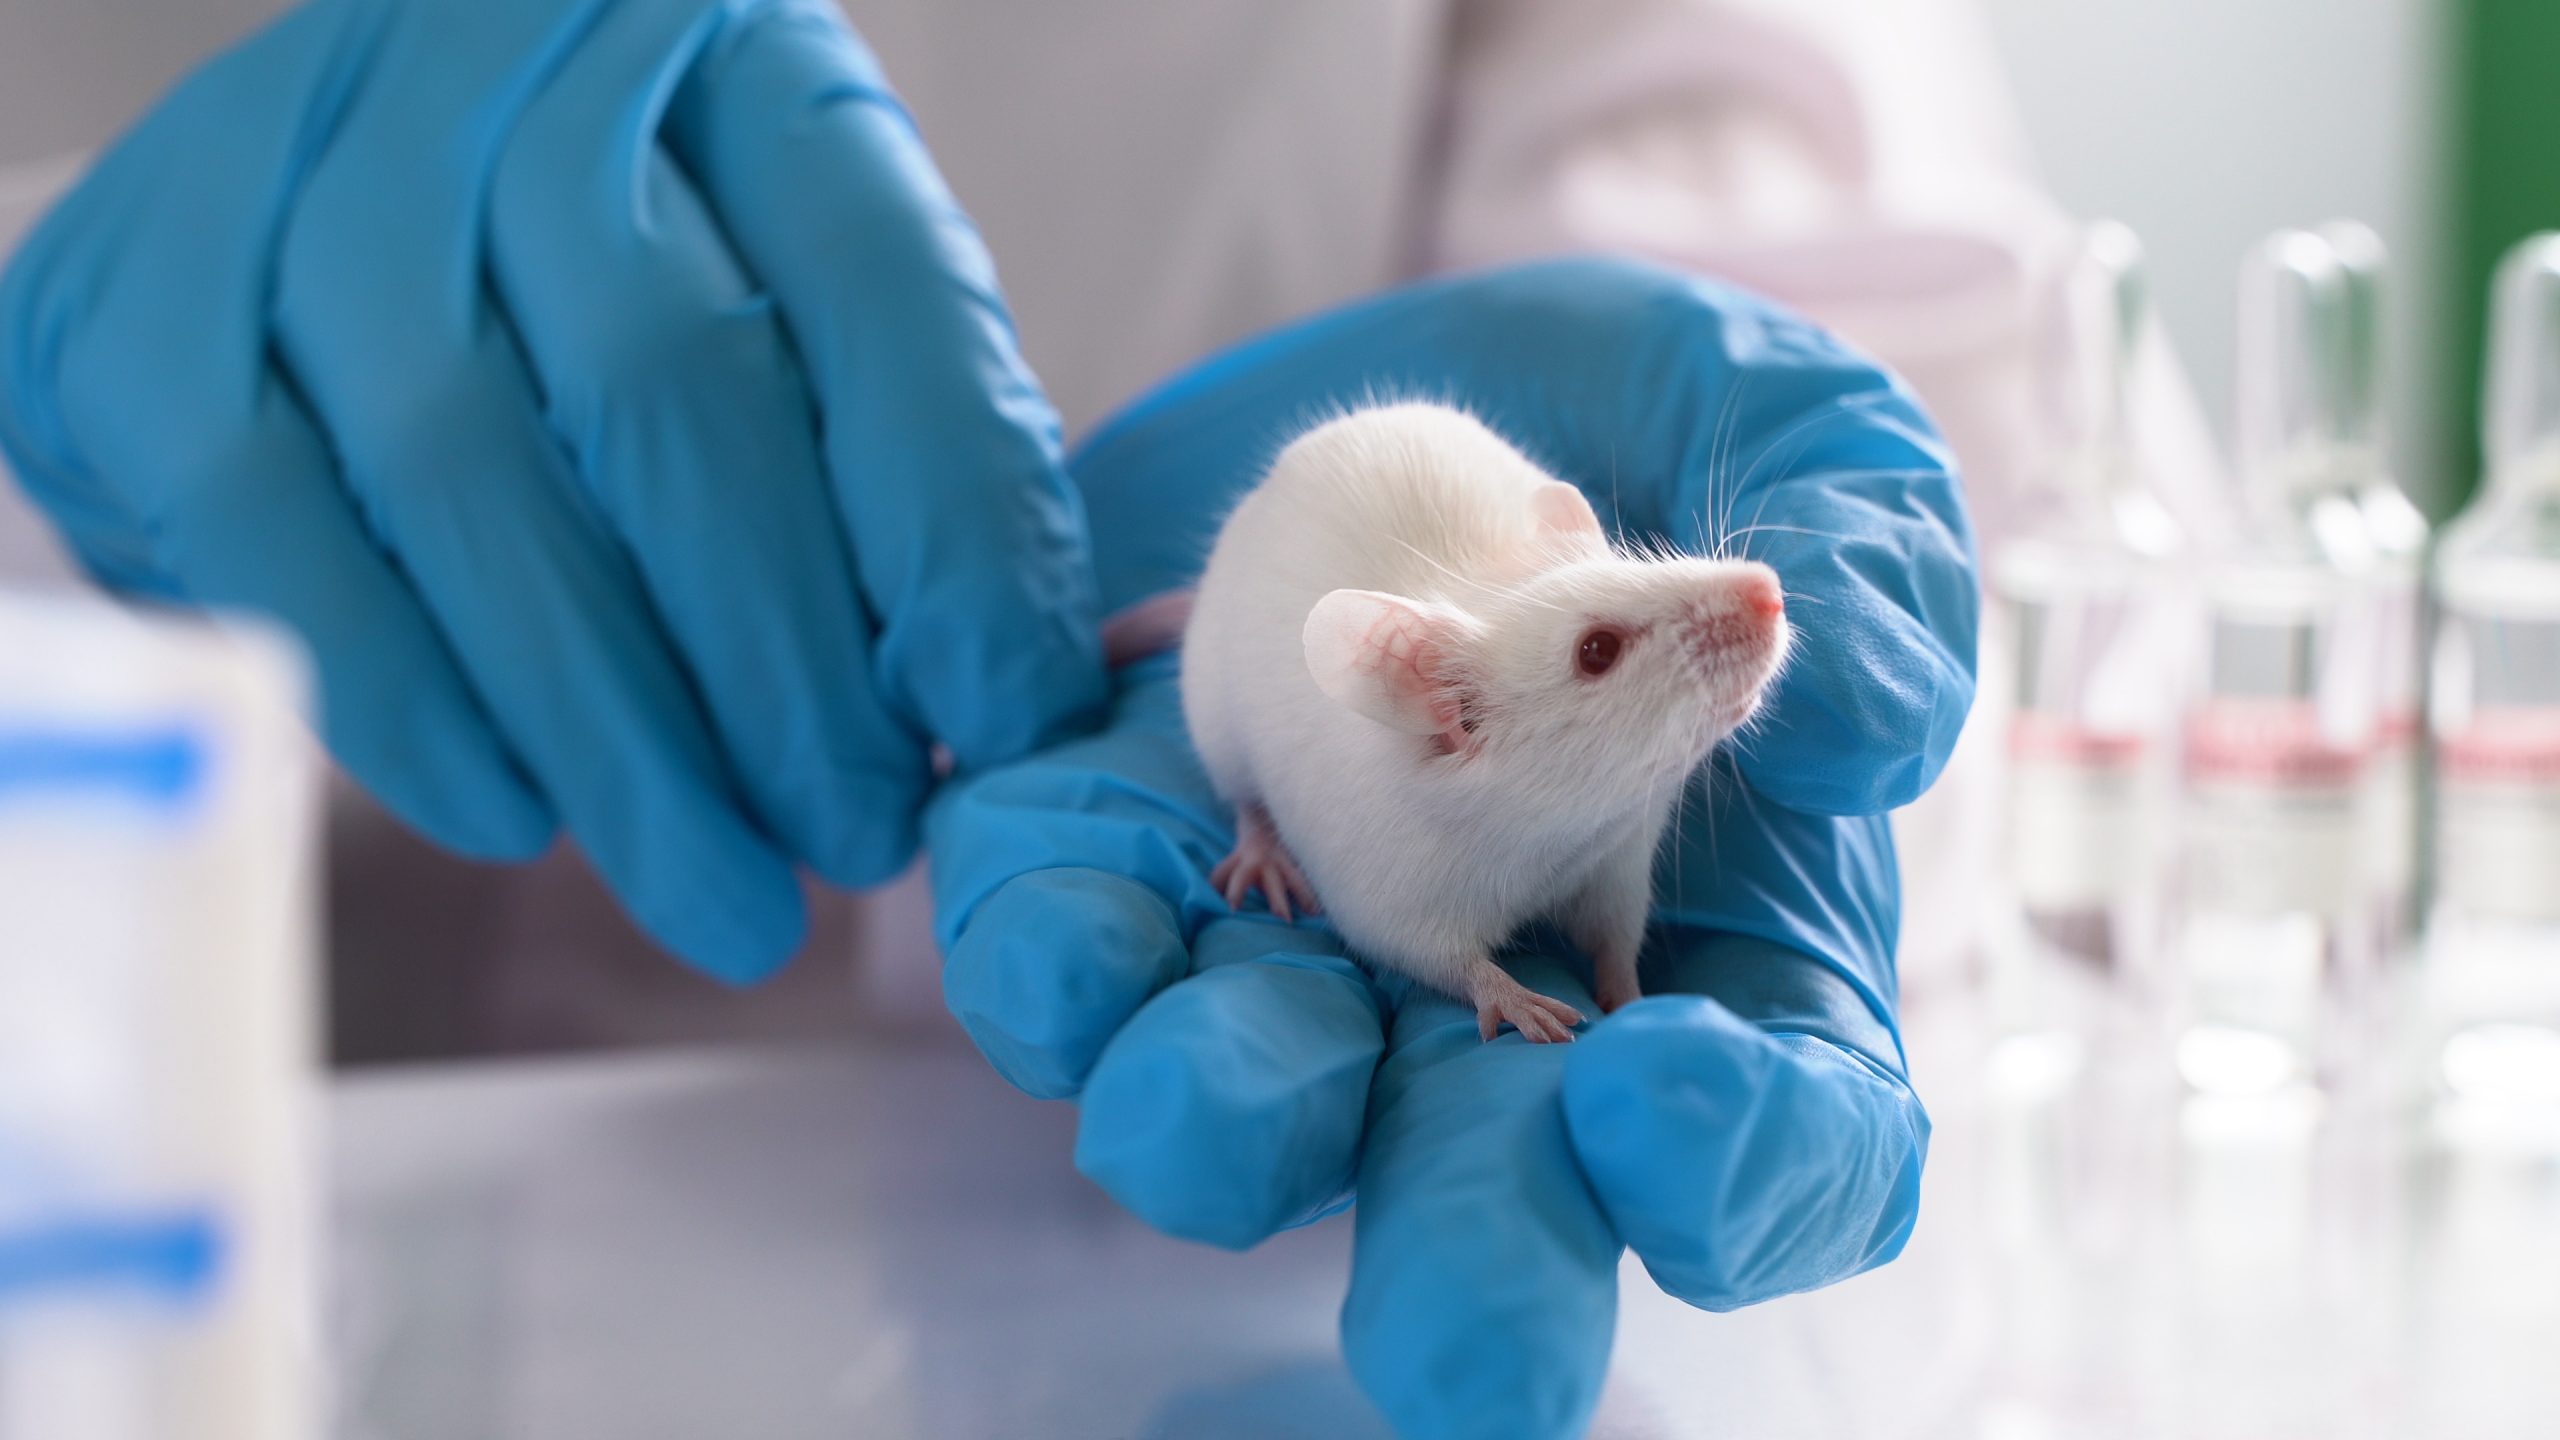 Researchers implanted mini human brains in mice, and they respond to light